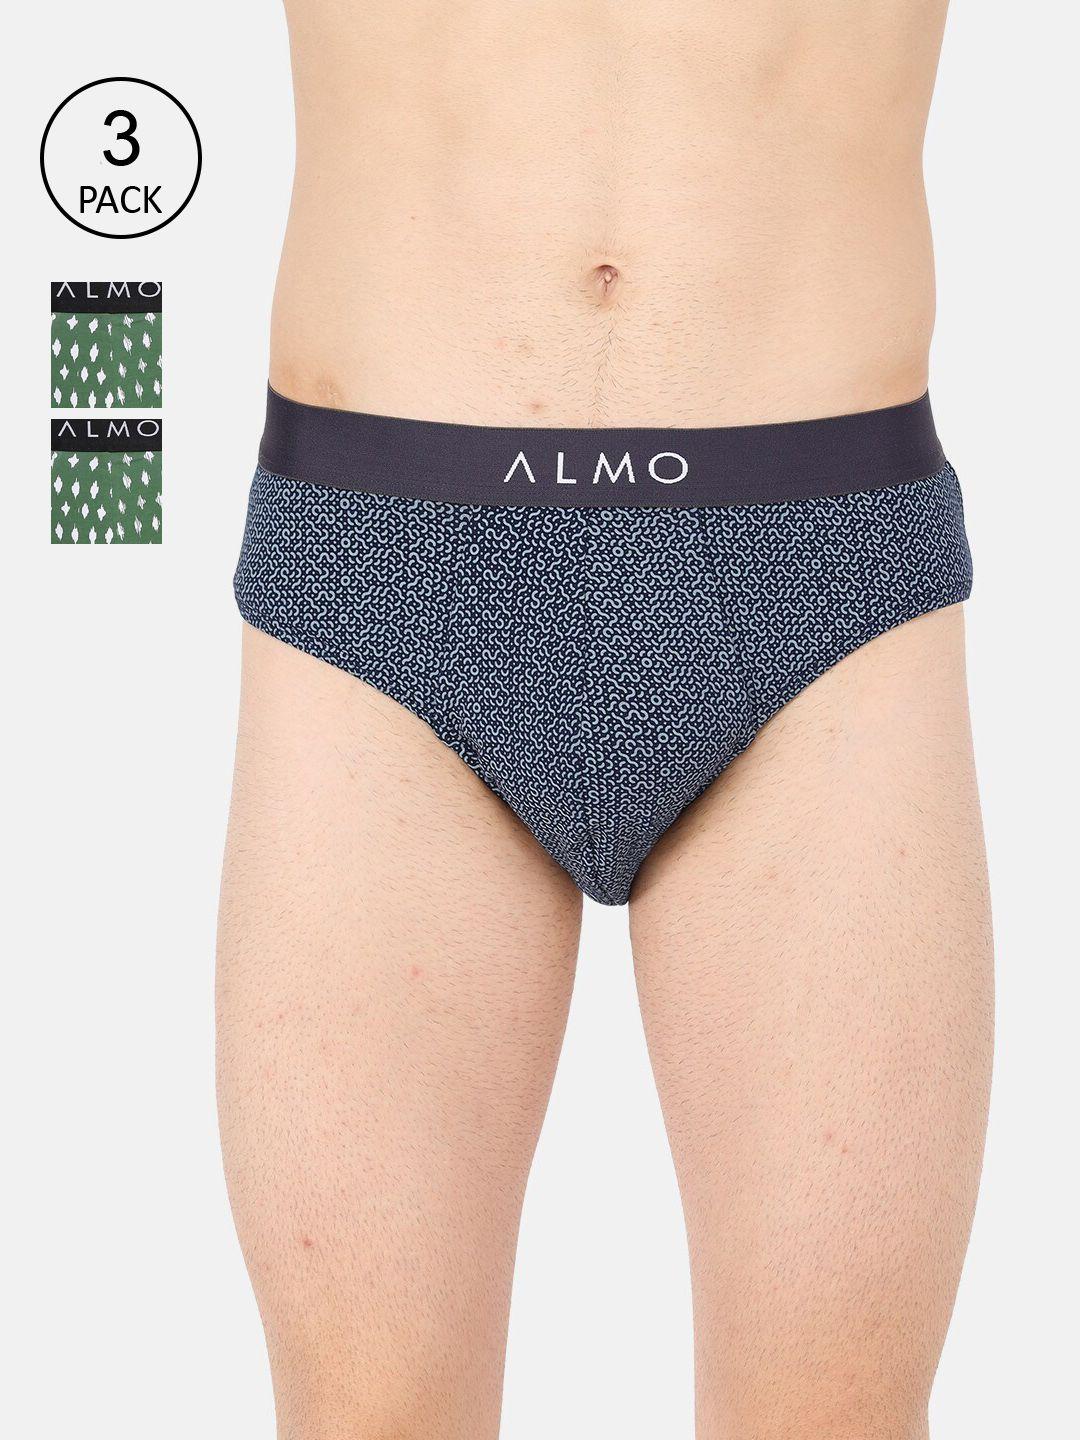 almo wear men pack of 3 printed organic cotton basic briefs